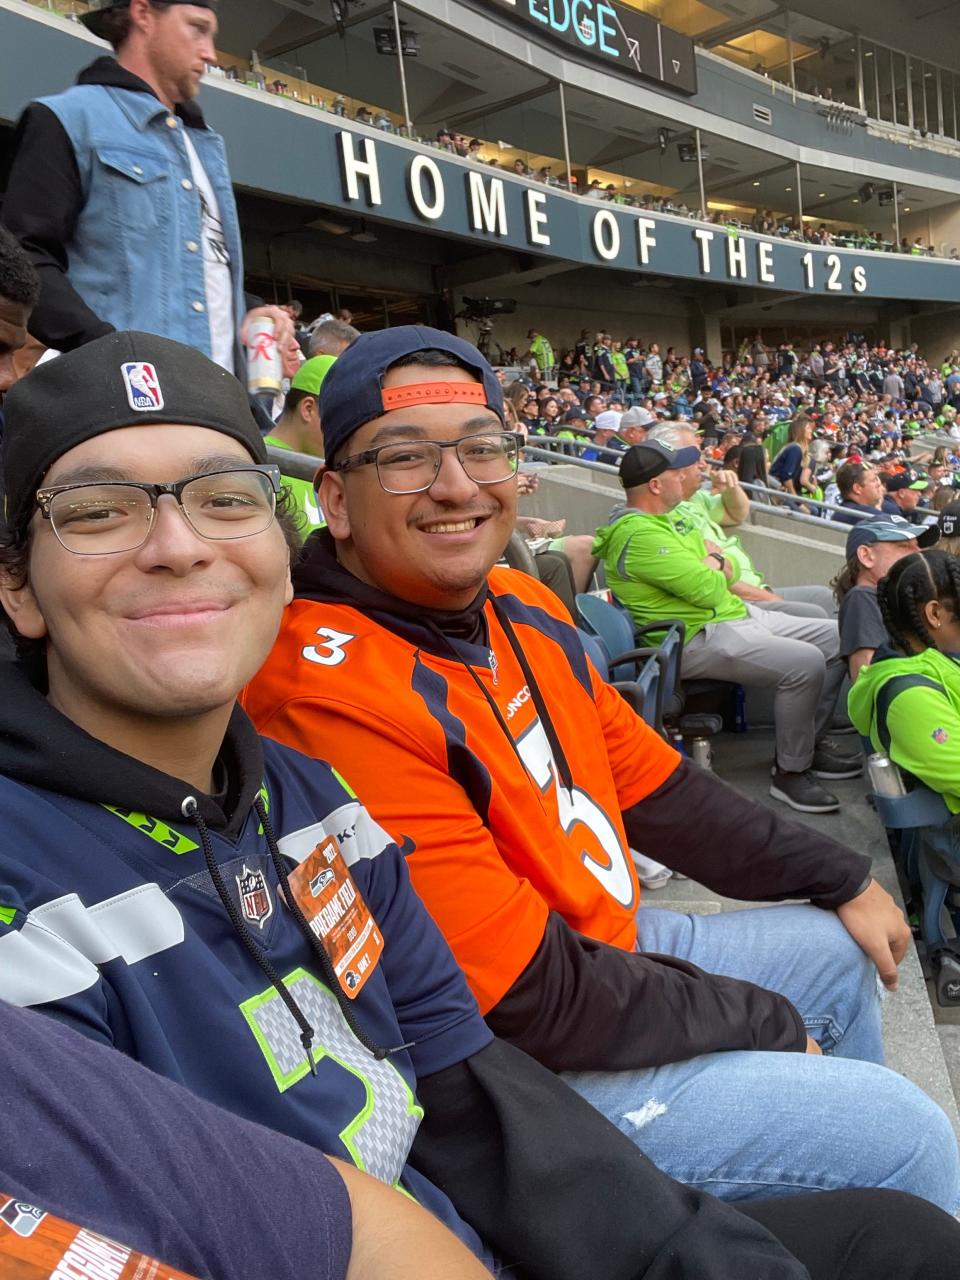 Adan Munoz and his brother, Gustavo, pose for a photo at a Seattle Seahawks game last September. Munoz passed away on April 15, 2023 after battling acute myeloid leukemia, a cancer of the bone marrow and blood.